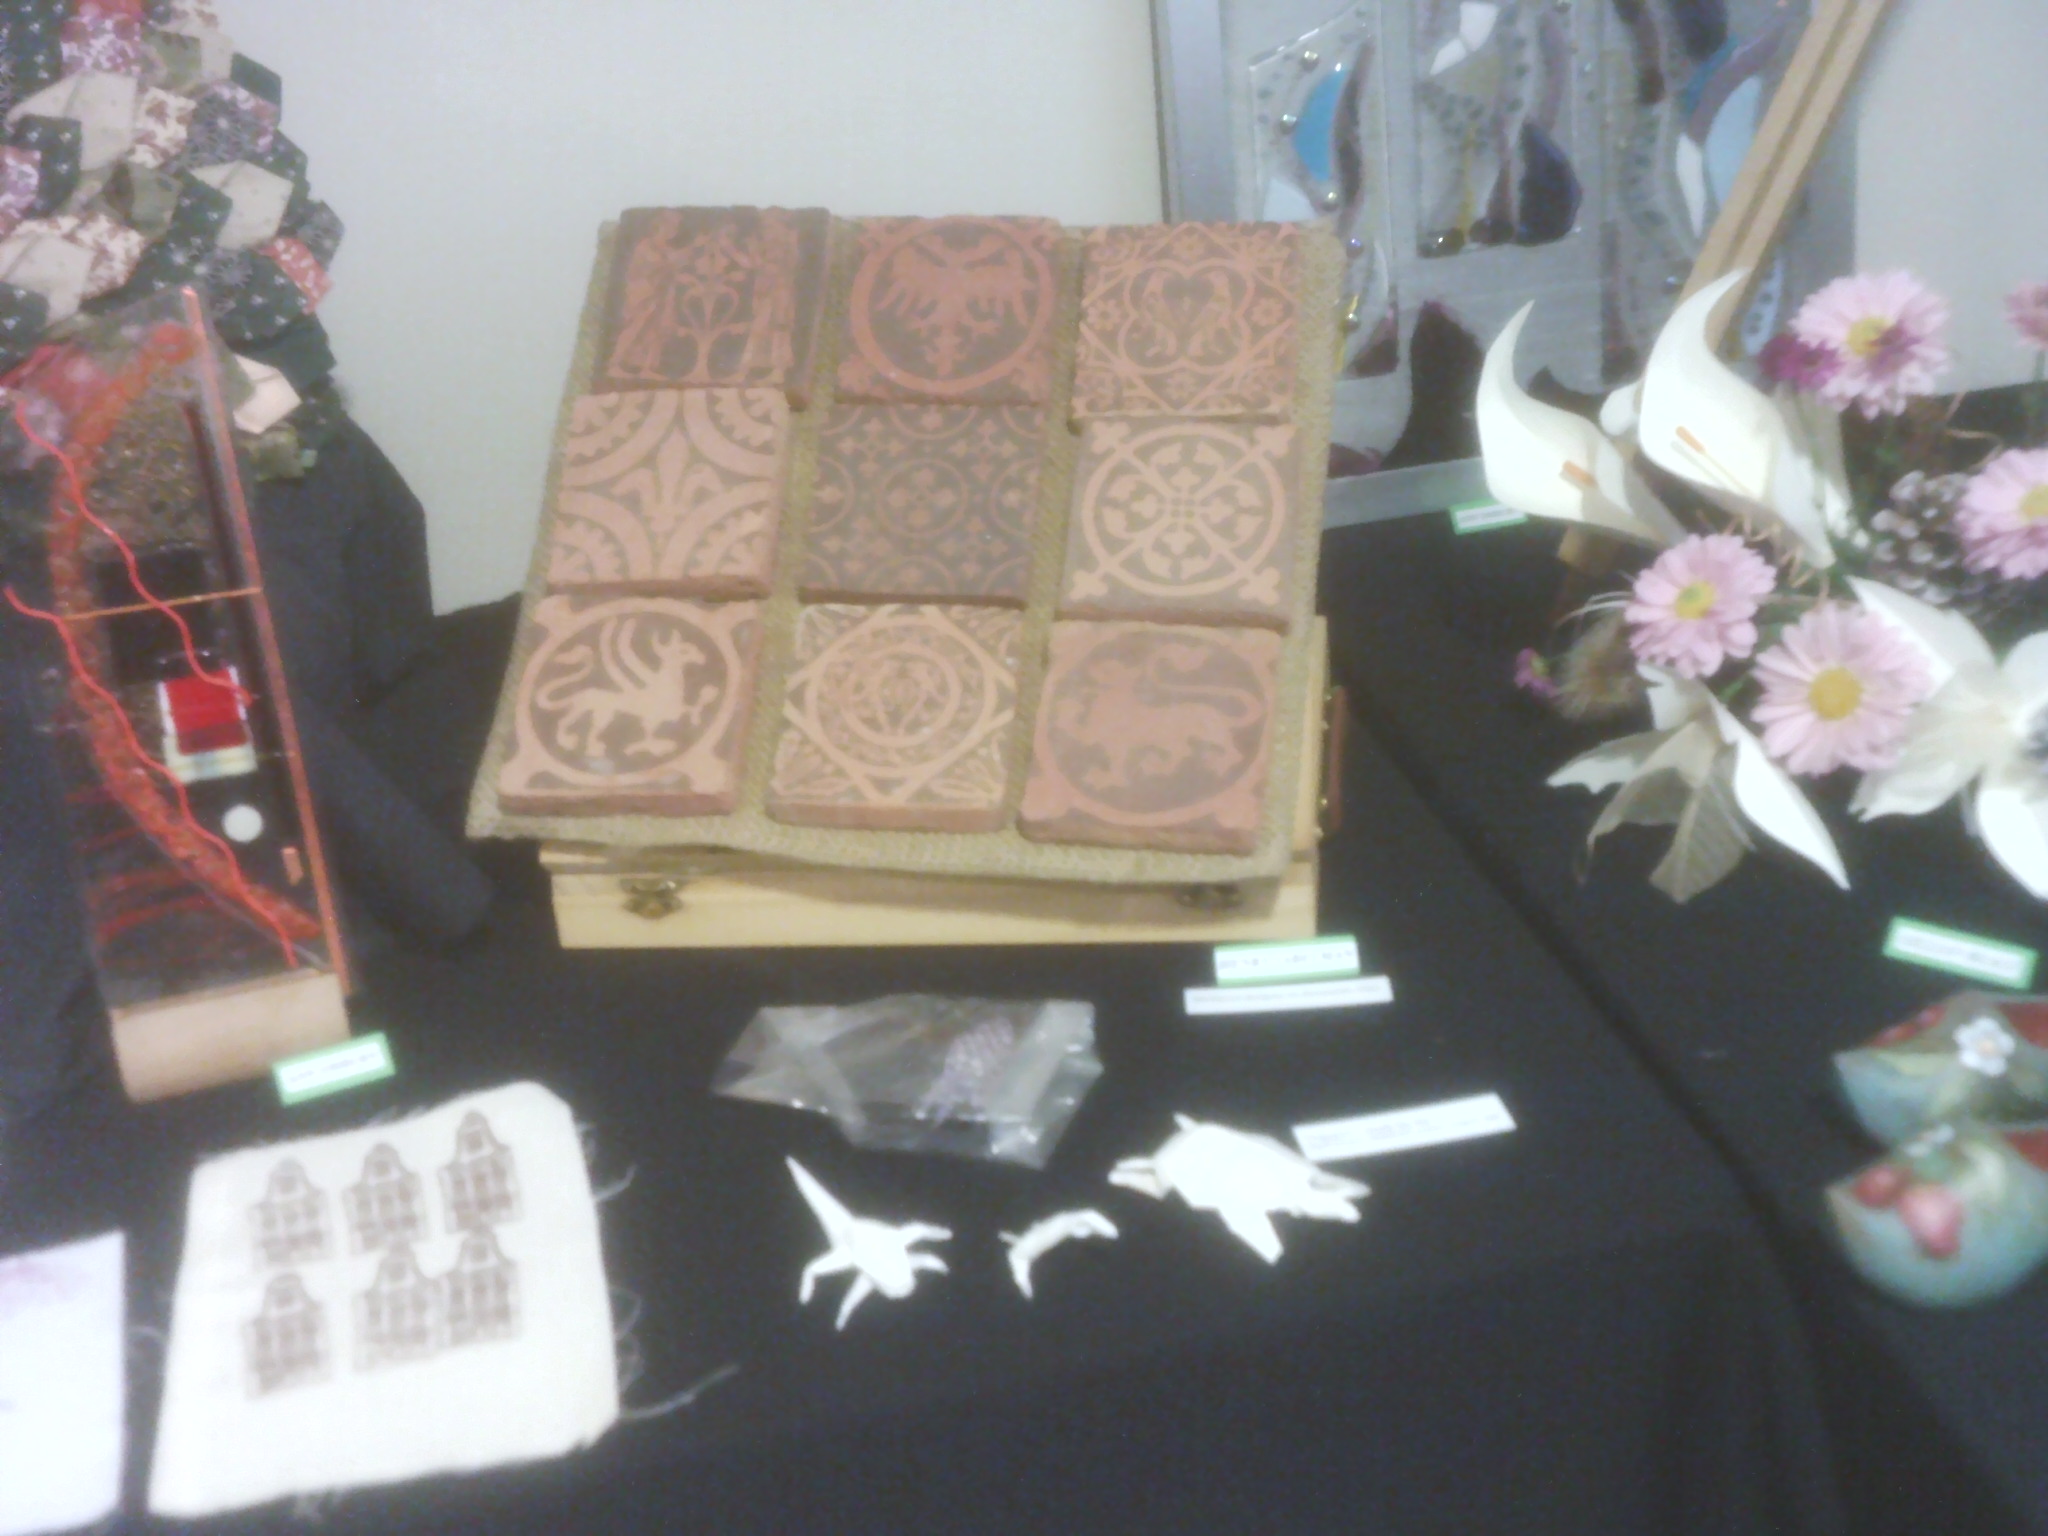 Tiles and origami at the Willersey Craft Show